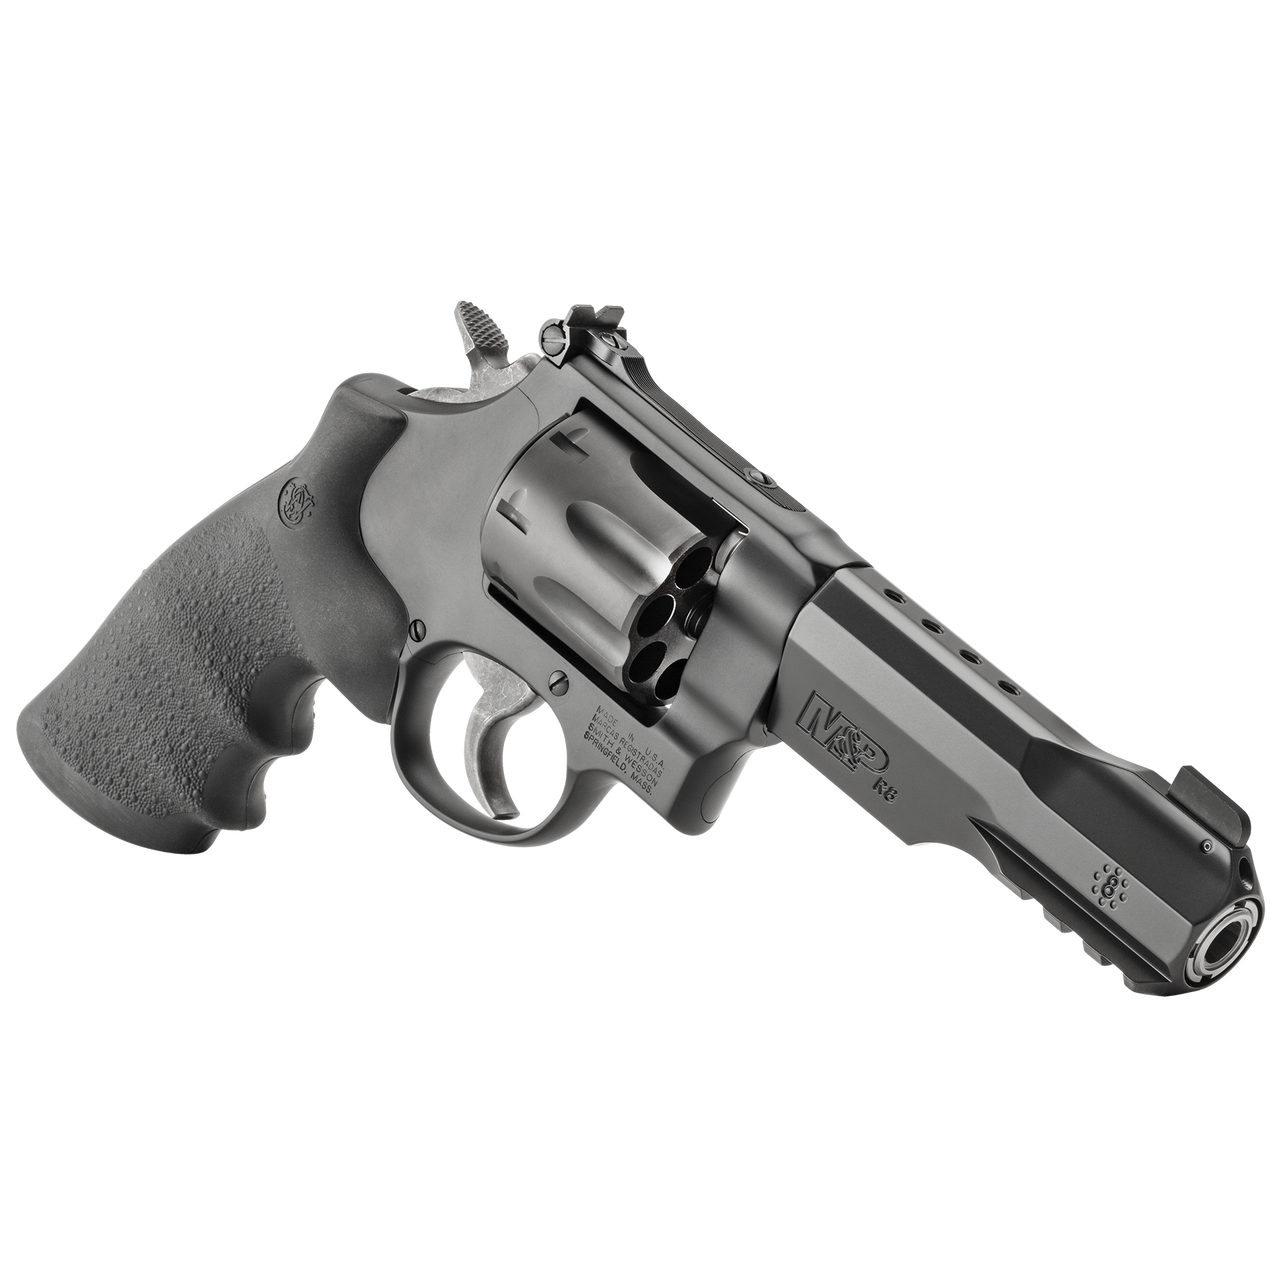 Buy Smith & Wesson Performance Center Model M&P R8 Revolver Online